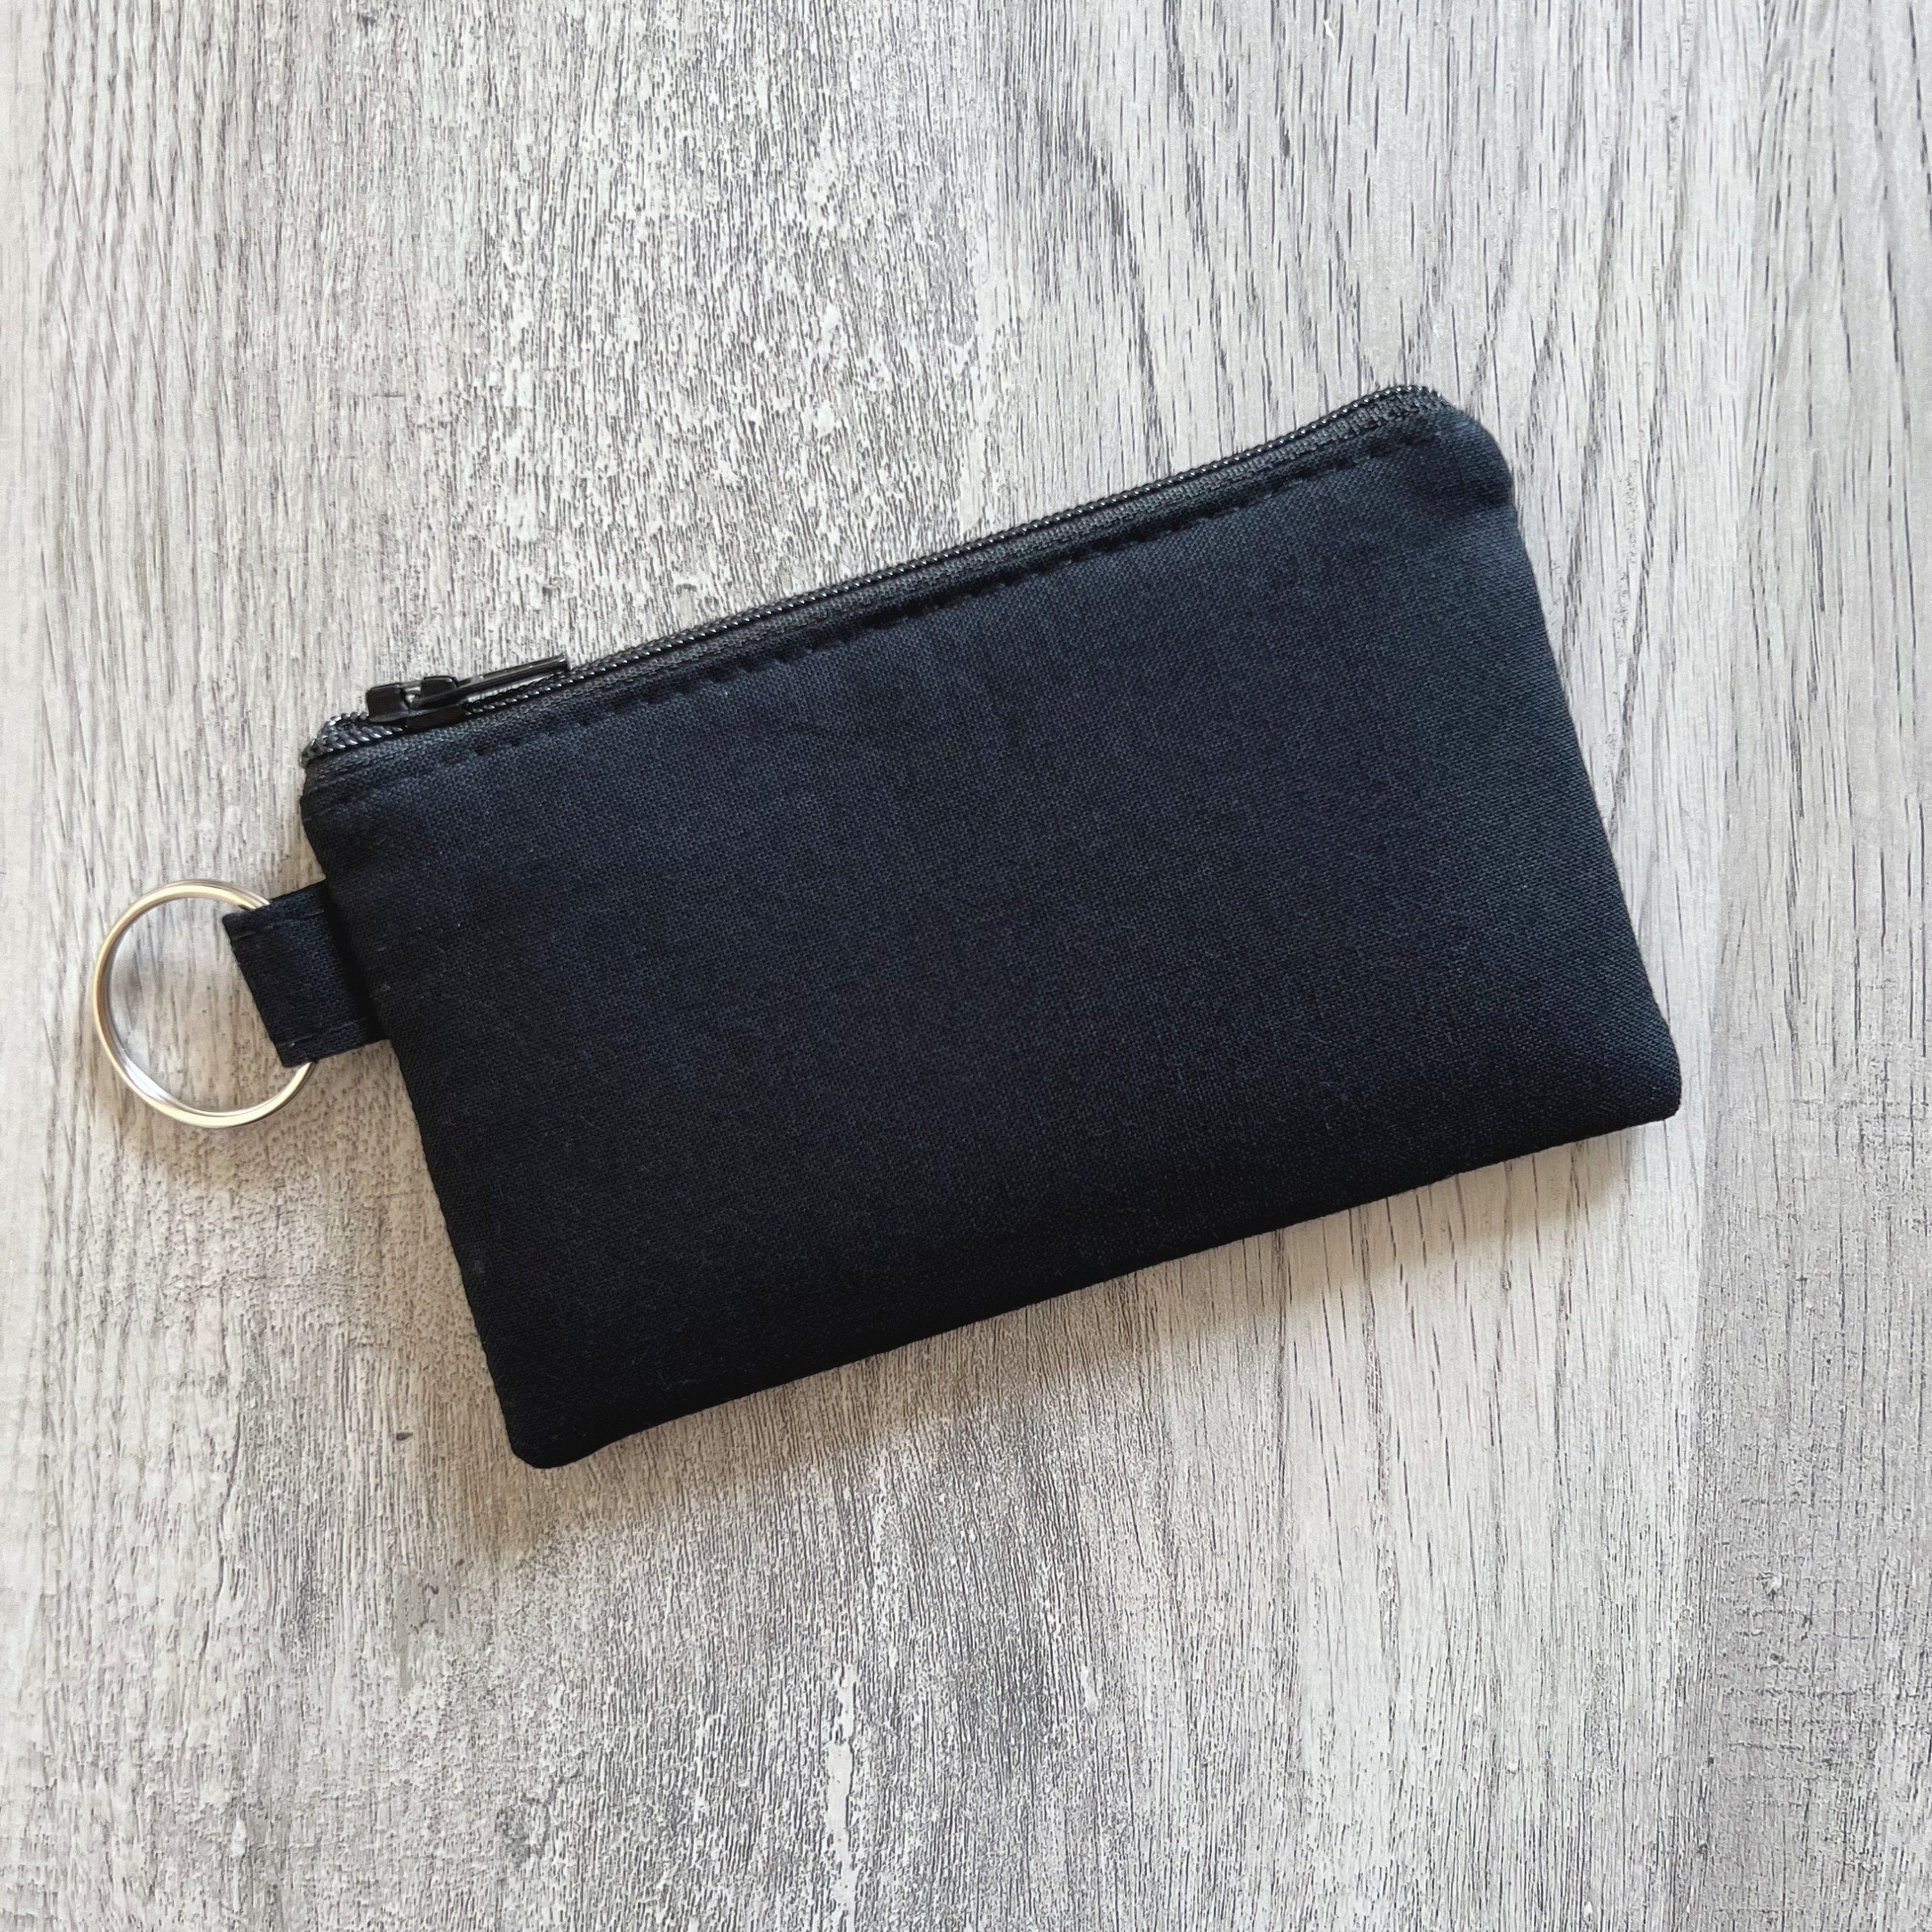 LOUIS VUITTON KEY POUCH CARD HOLDER for Sale in Rancho